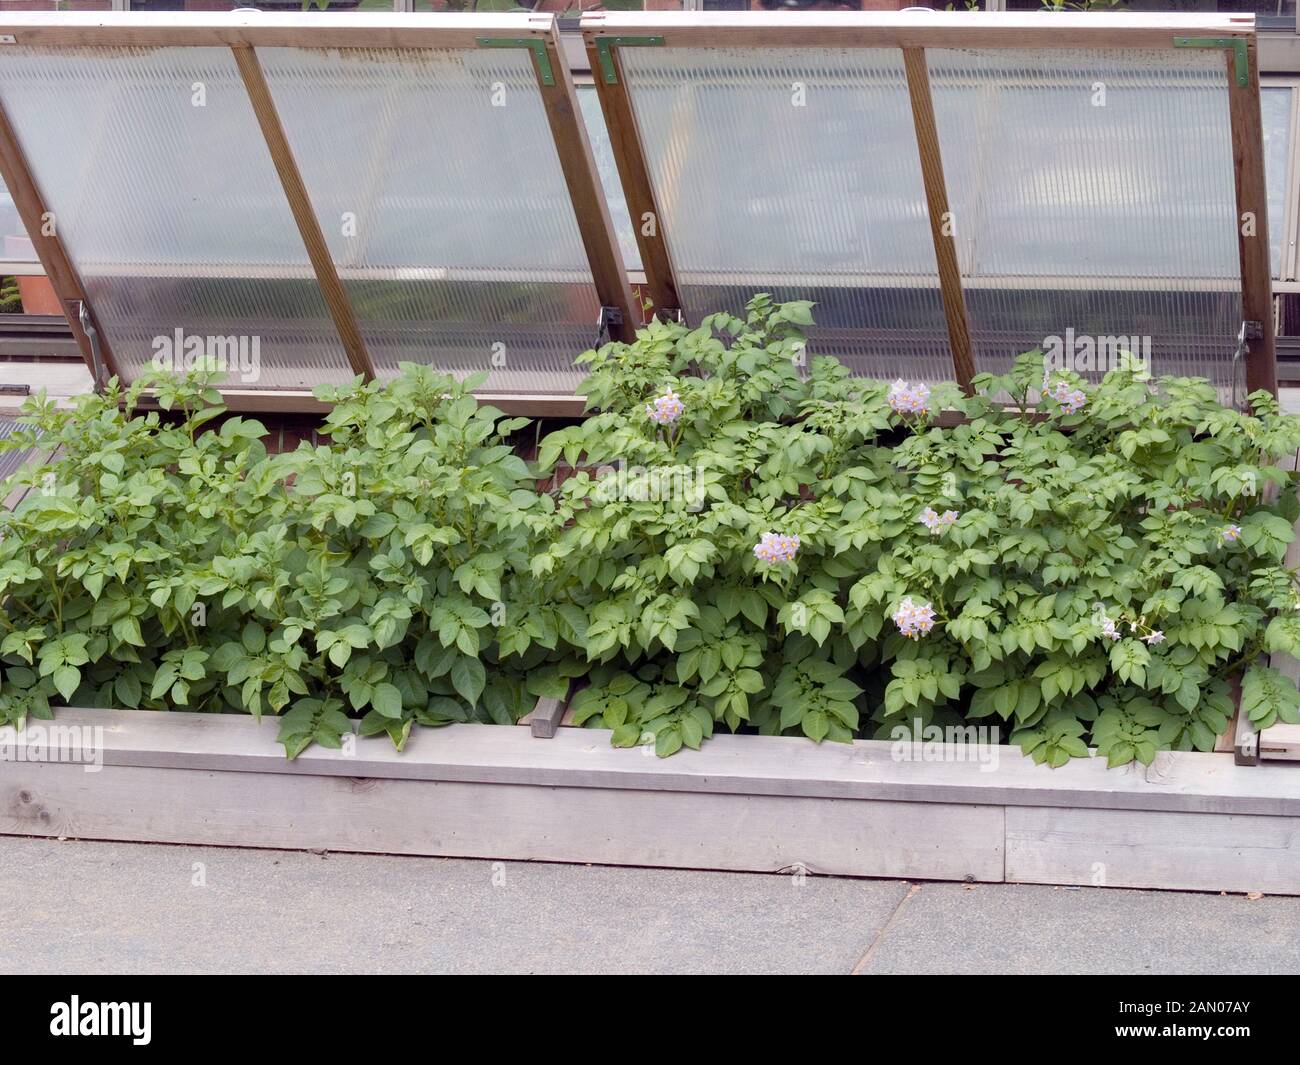 COLD FRAME WITH POTATOES Stock Photo